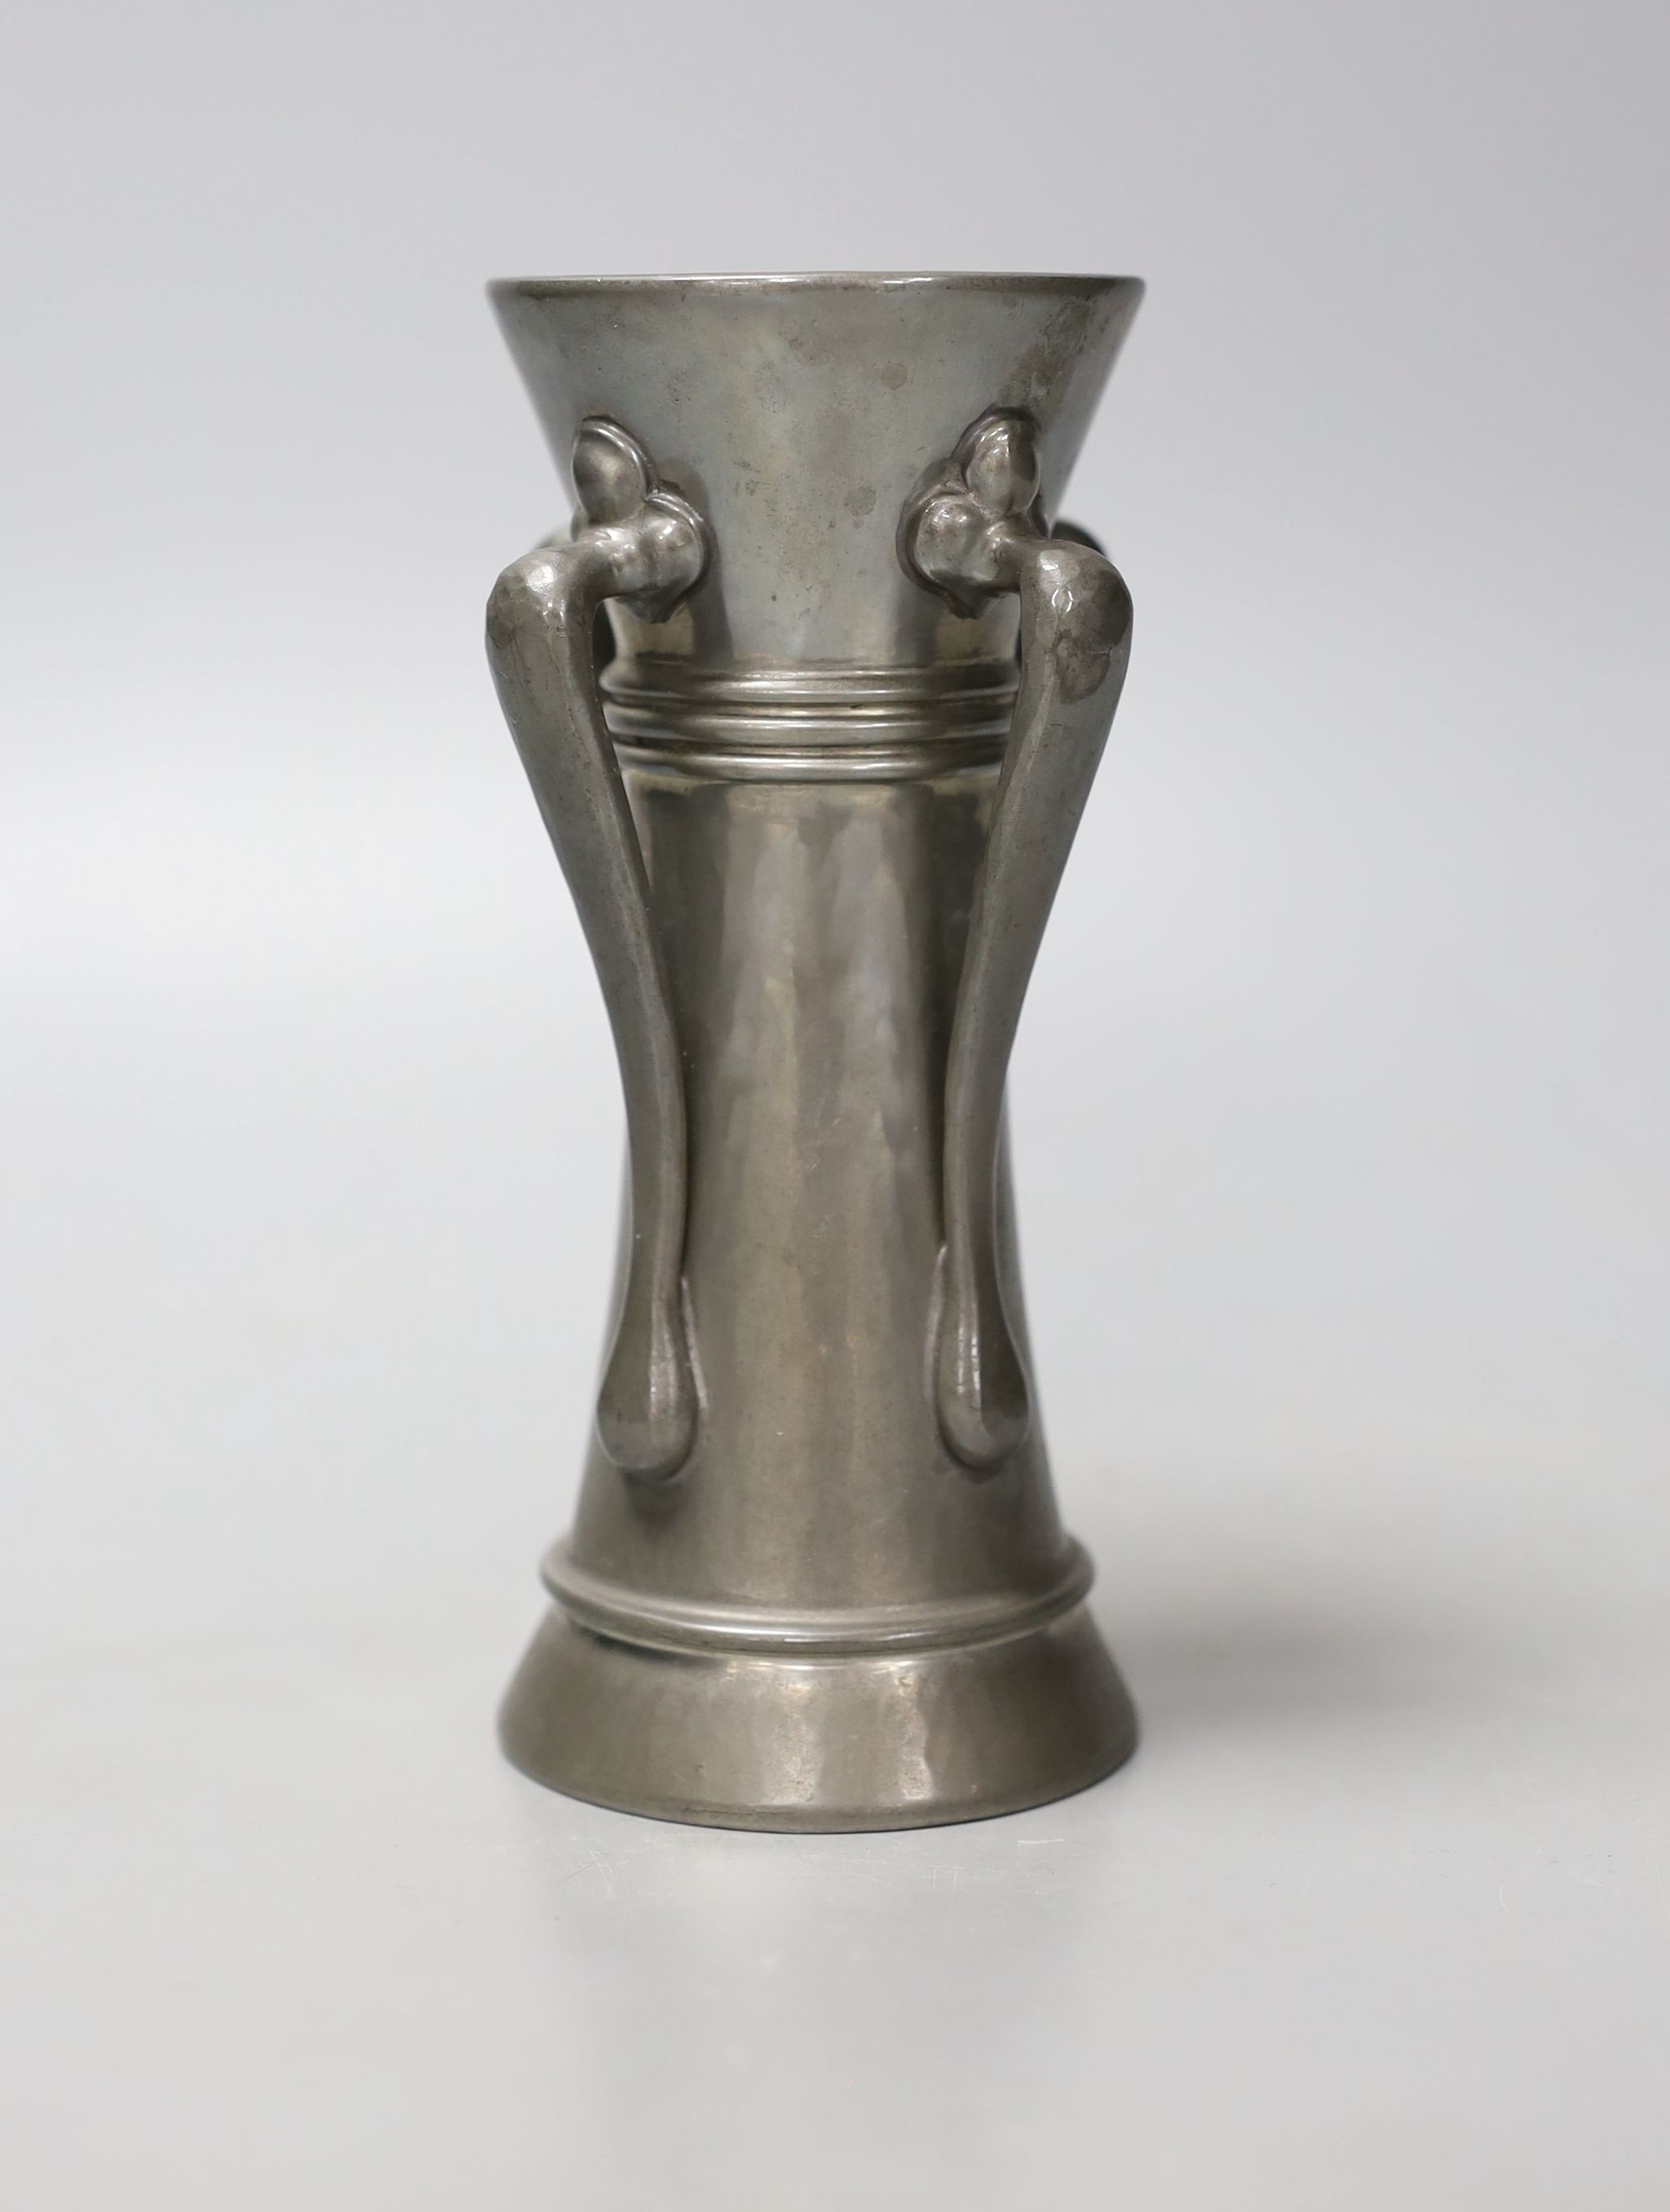 A Liberty’s Tudric pewter four-handled vase designed by Archibald Knox, shape 01214, 14cm. *This lot is being sold in aid of Prostate Cancer UK with 100% of the hammer price going to the charity”